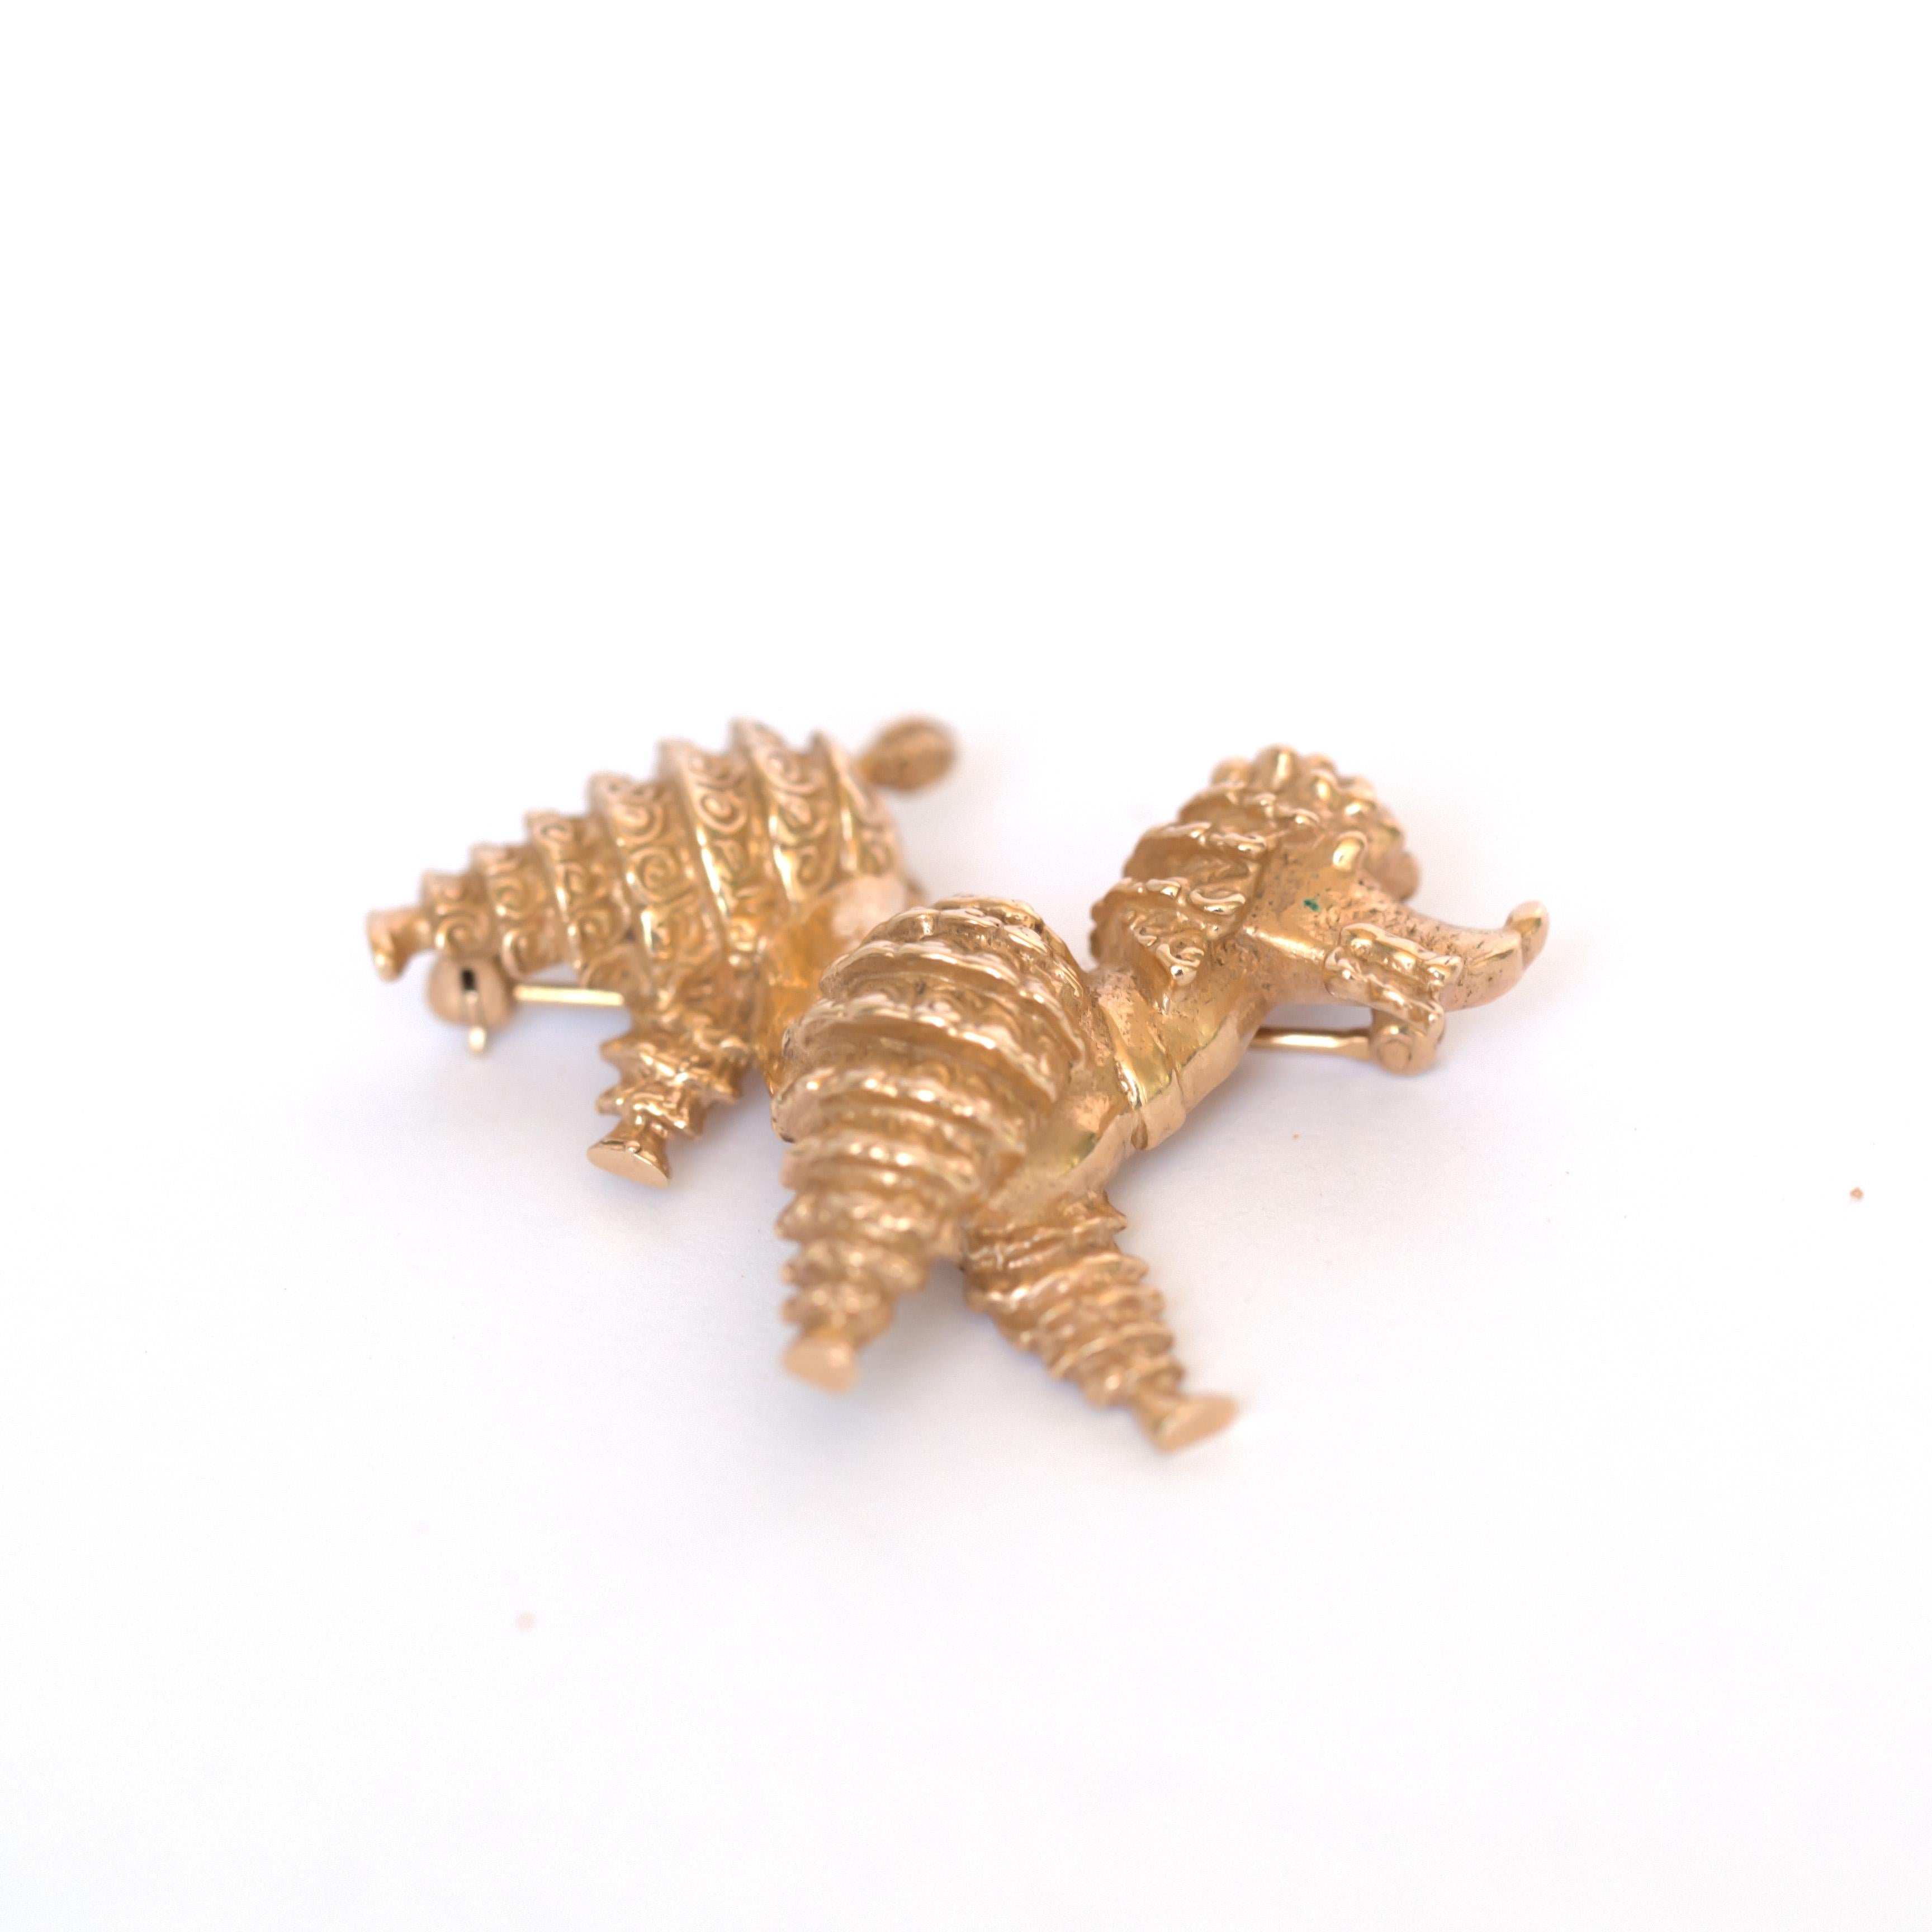 Item Details: 
Metal Type: 14 karat Yellow Gold [Tested]
Weight:  15.7 grams

Condition:  Excellent